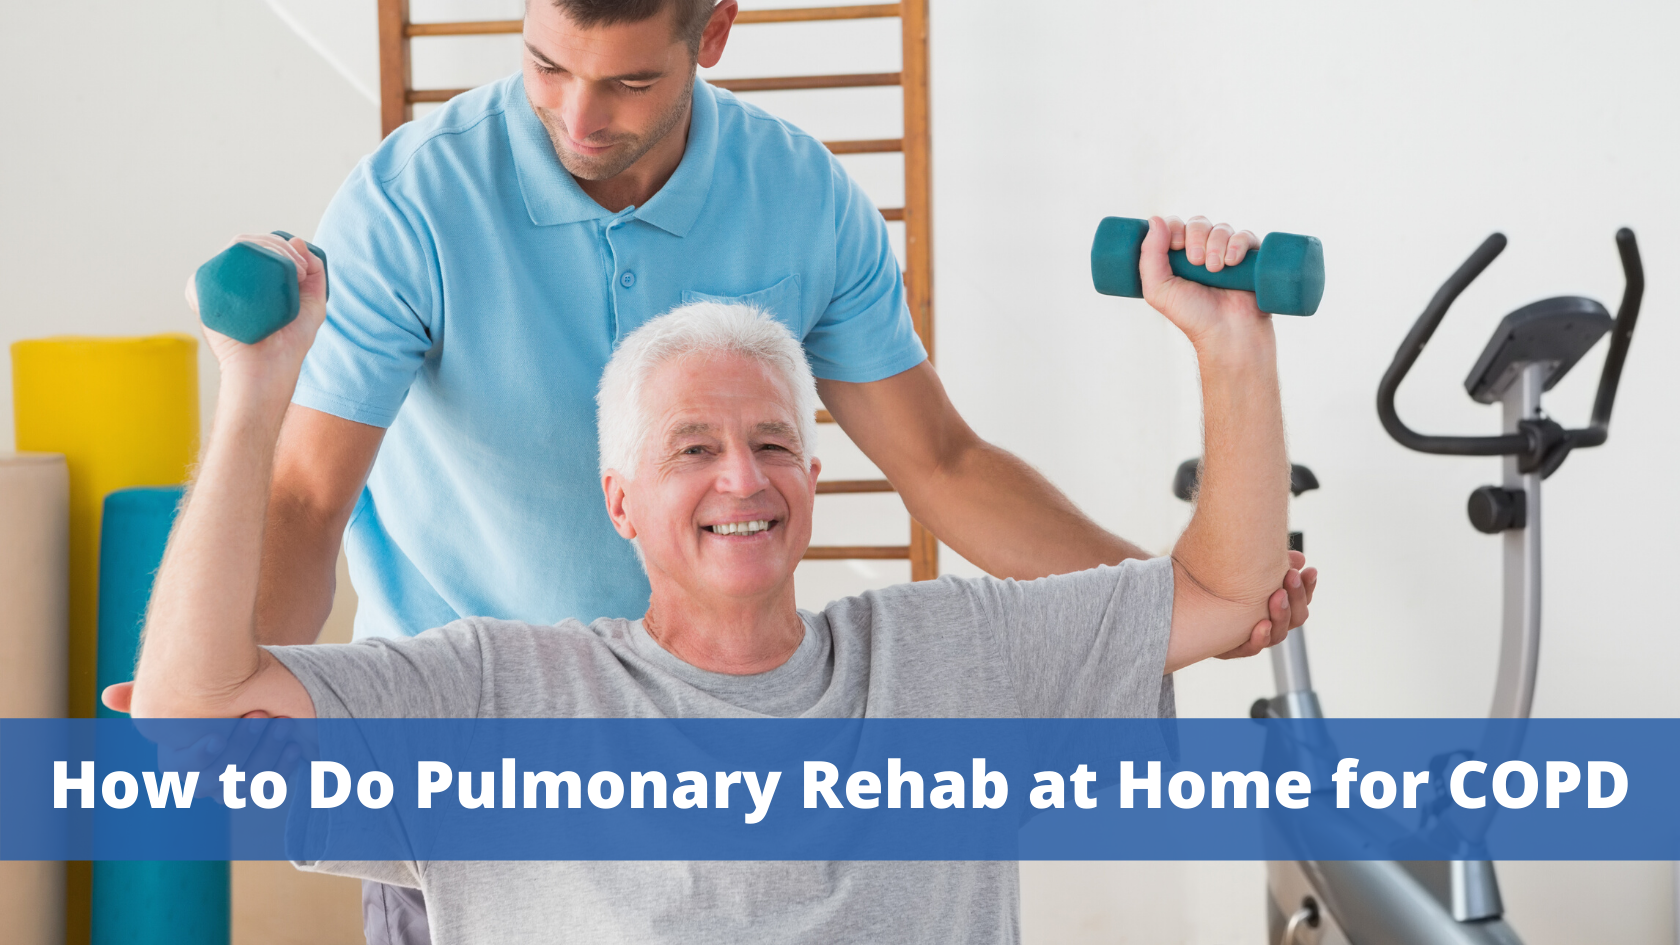 How to Do Pulmonary Rehab at Home for COPD